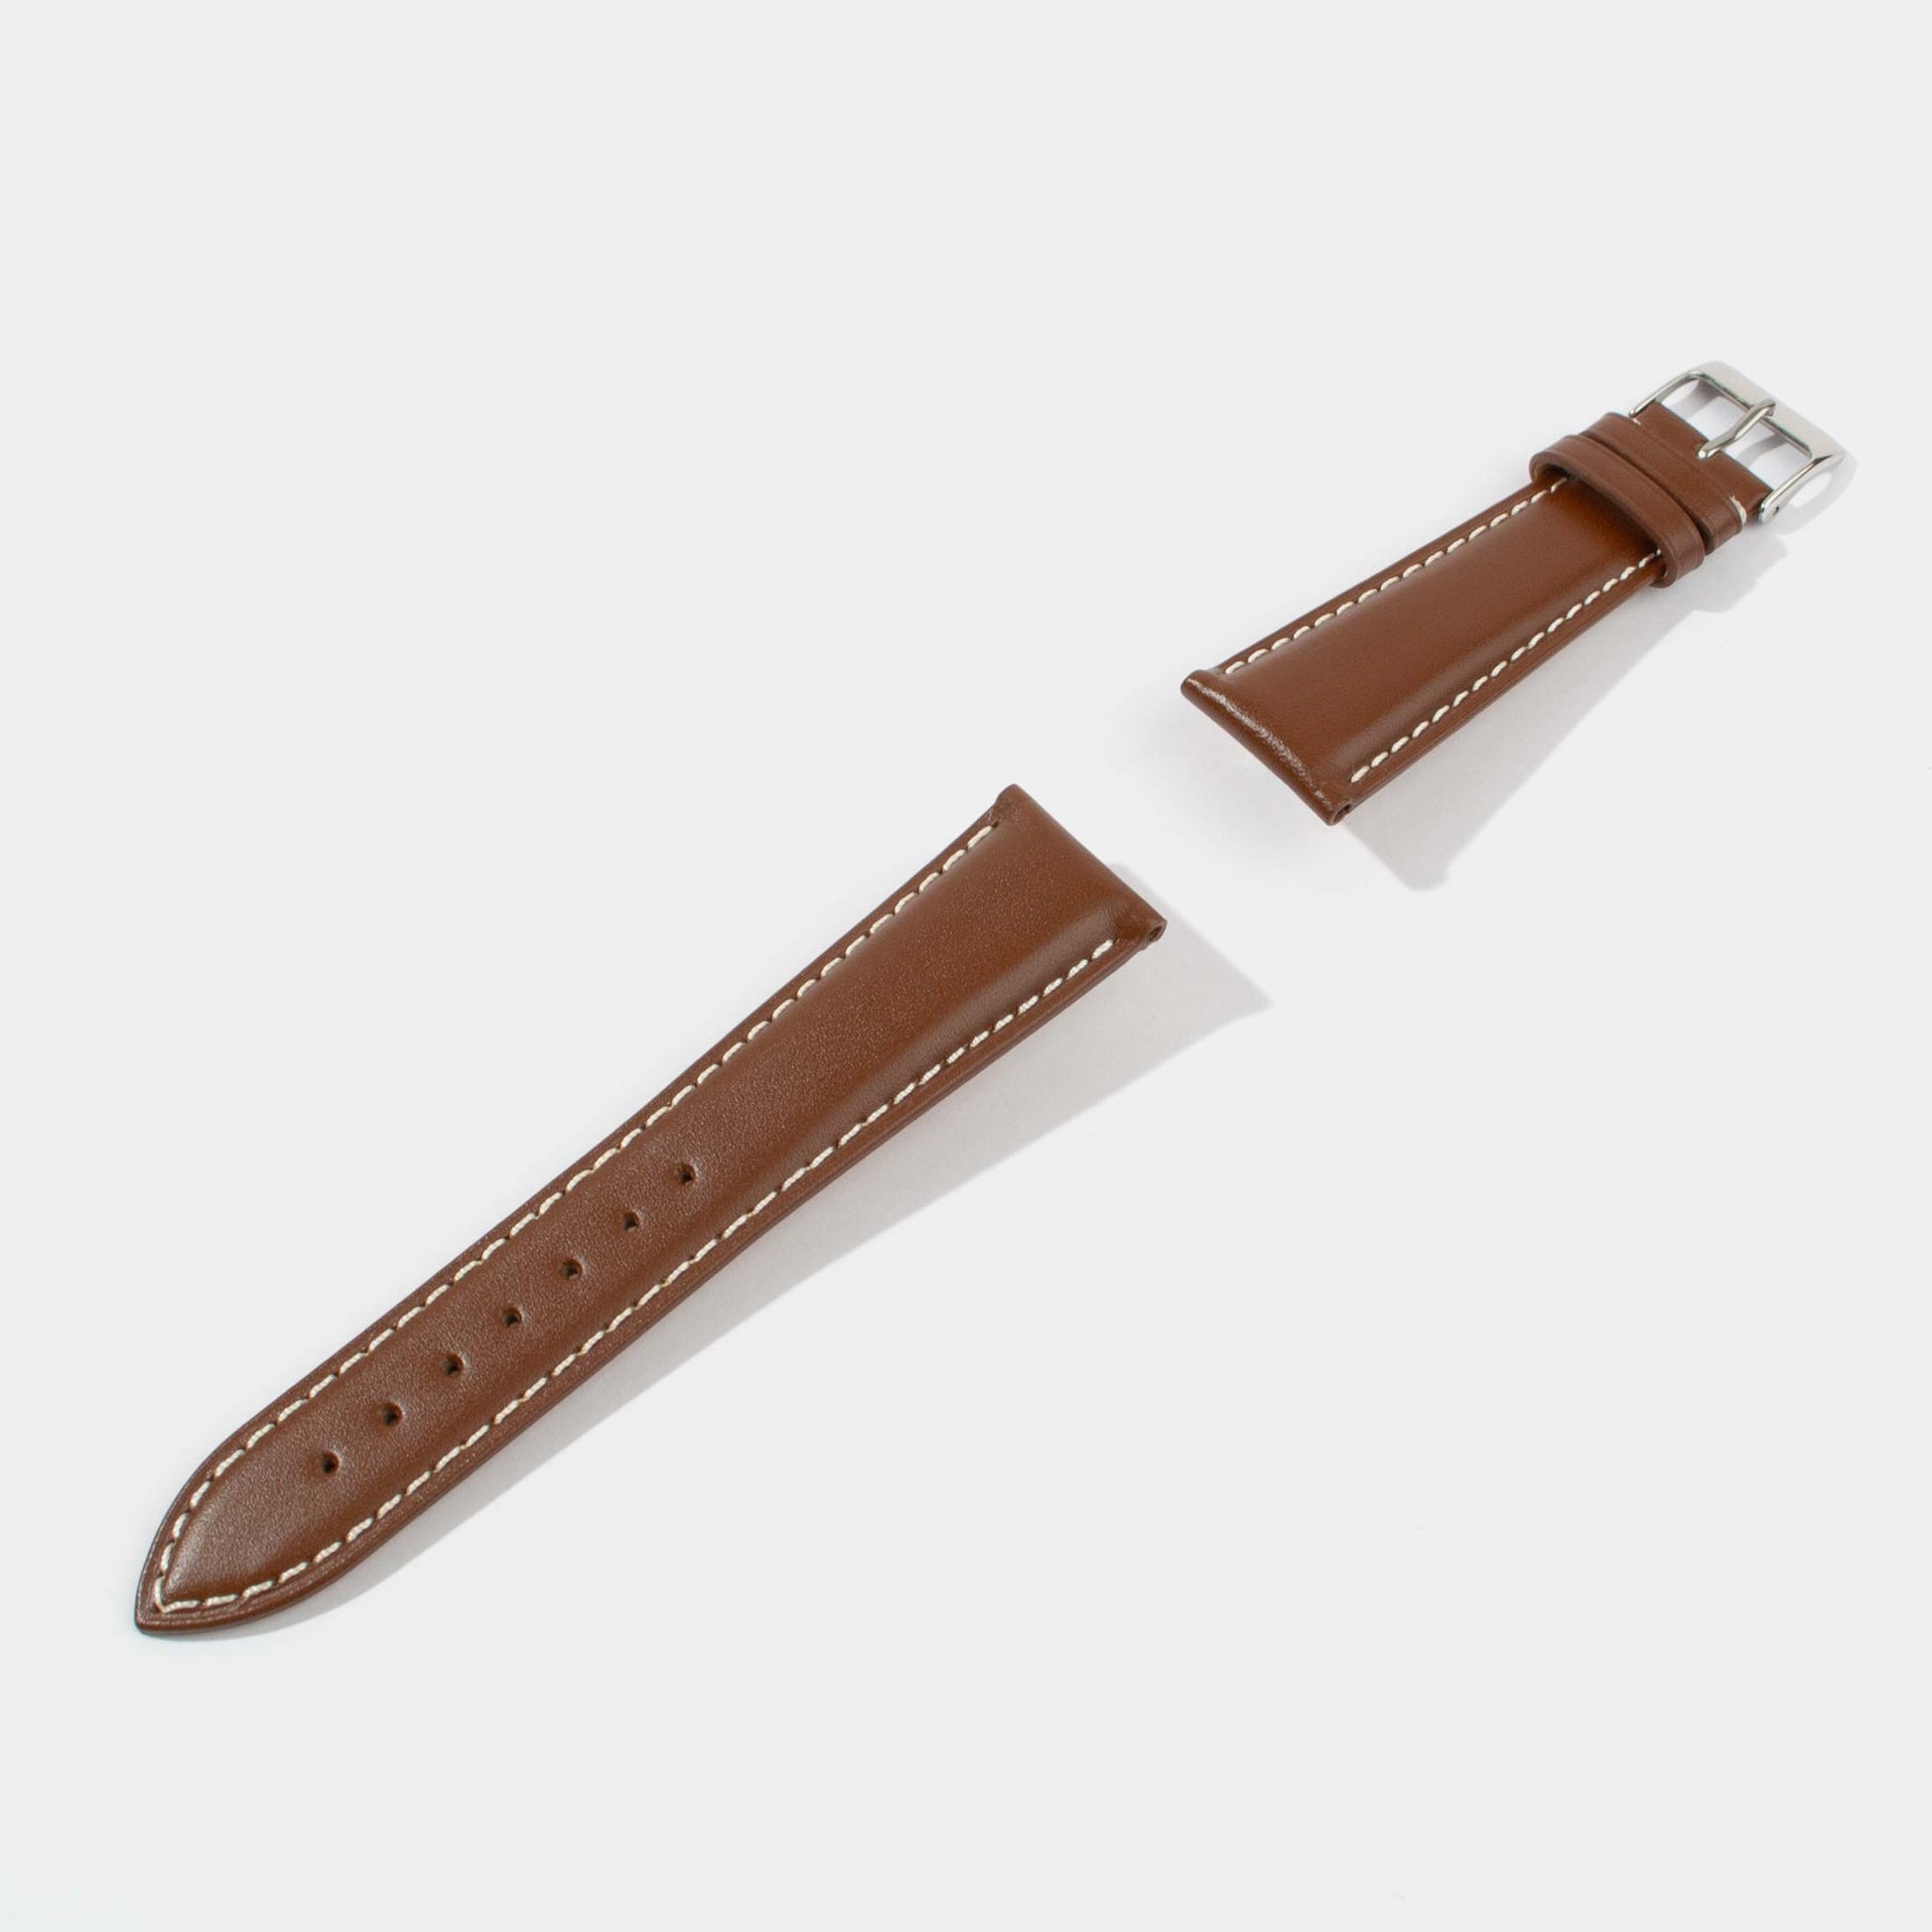 Italian Vegetable Tanned Calf Leather Watch Strap-Universal Watch Strap-Brown